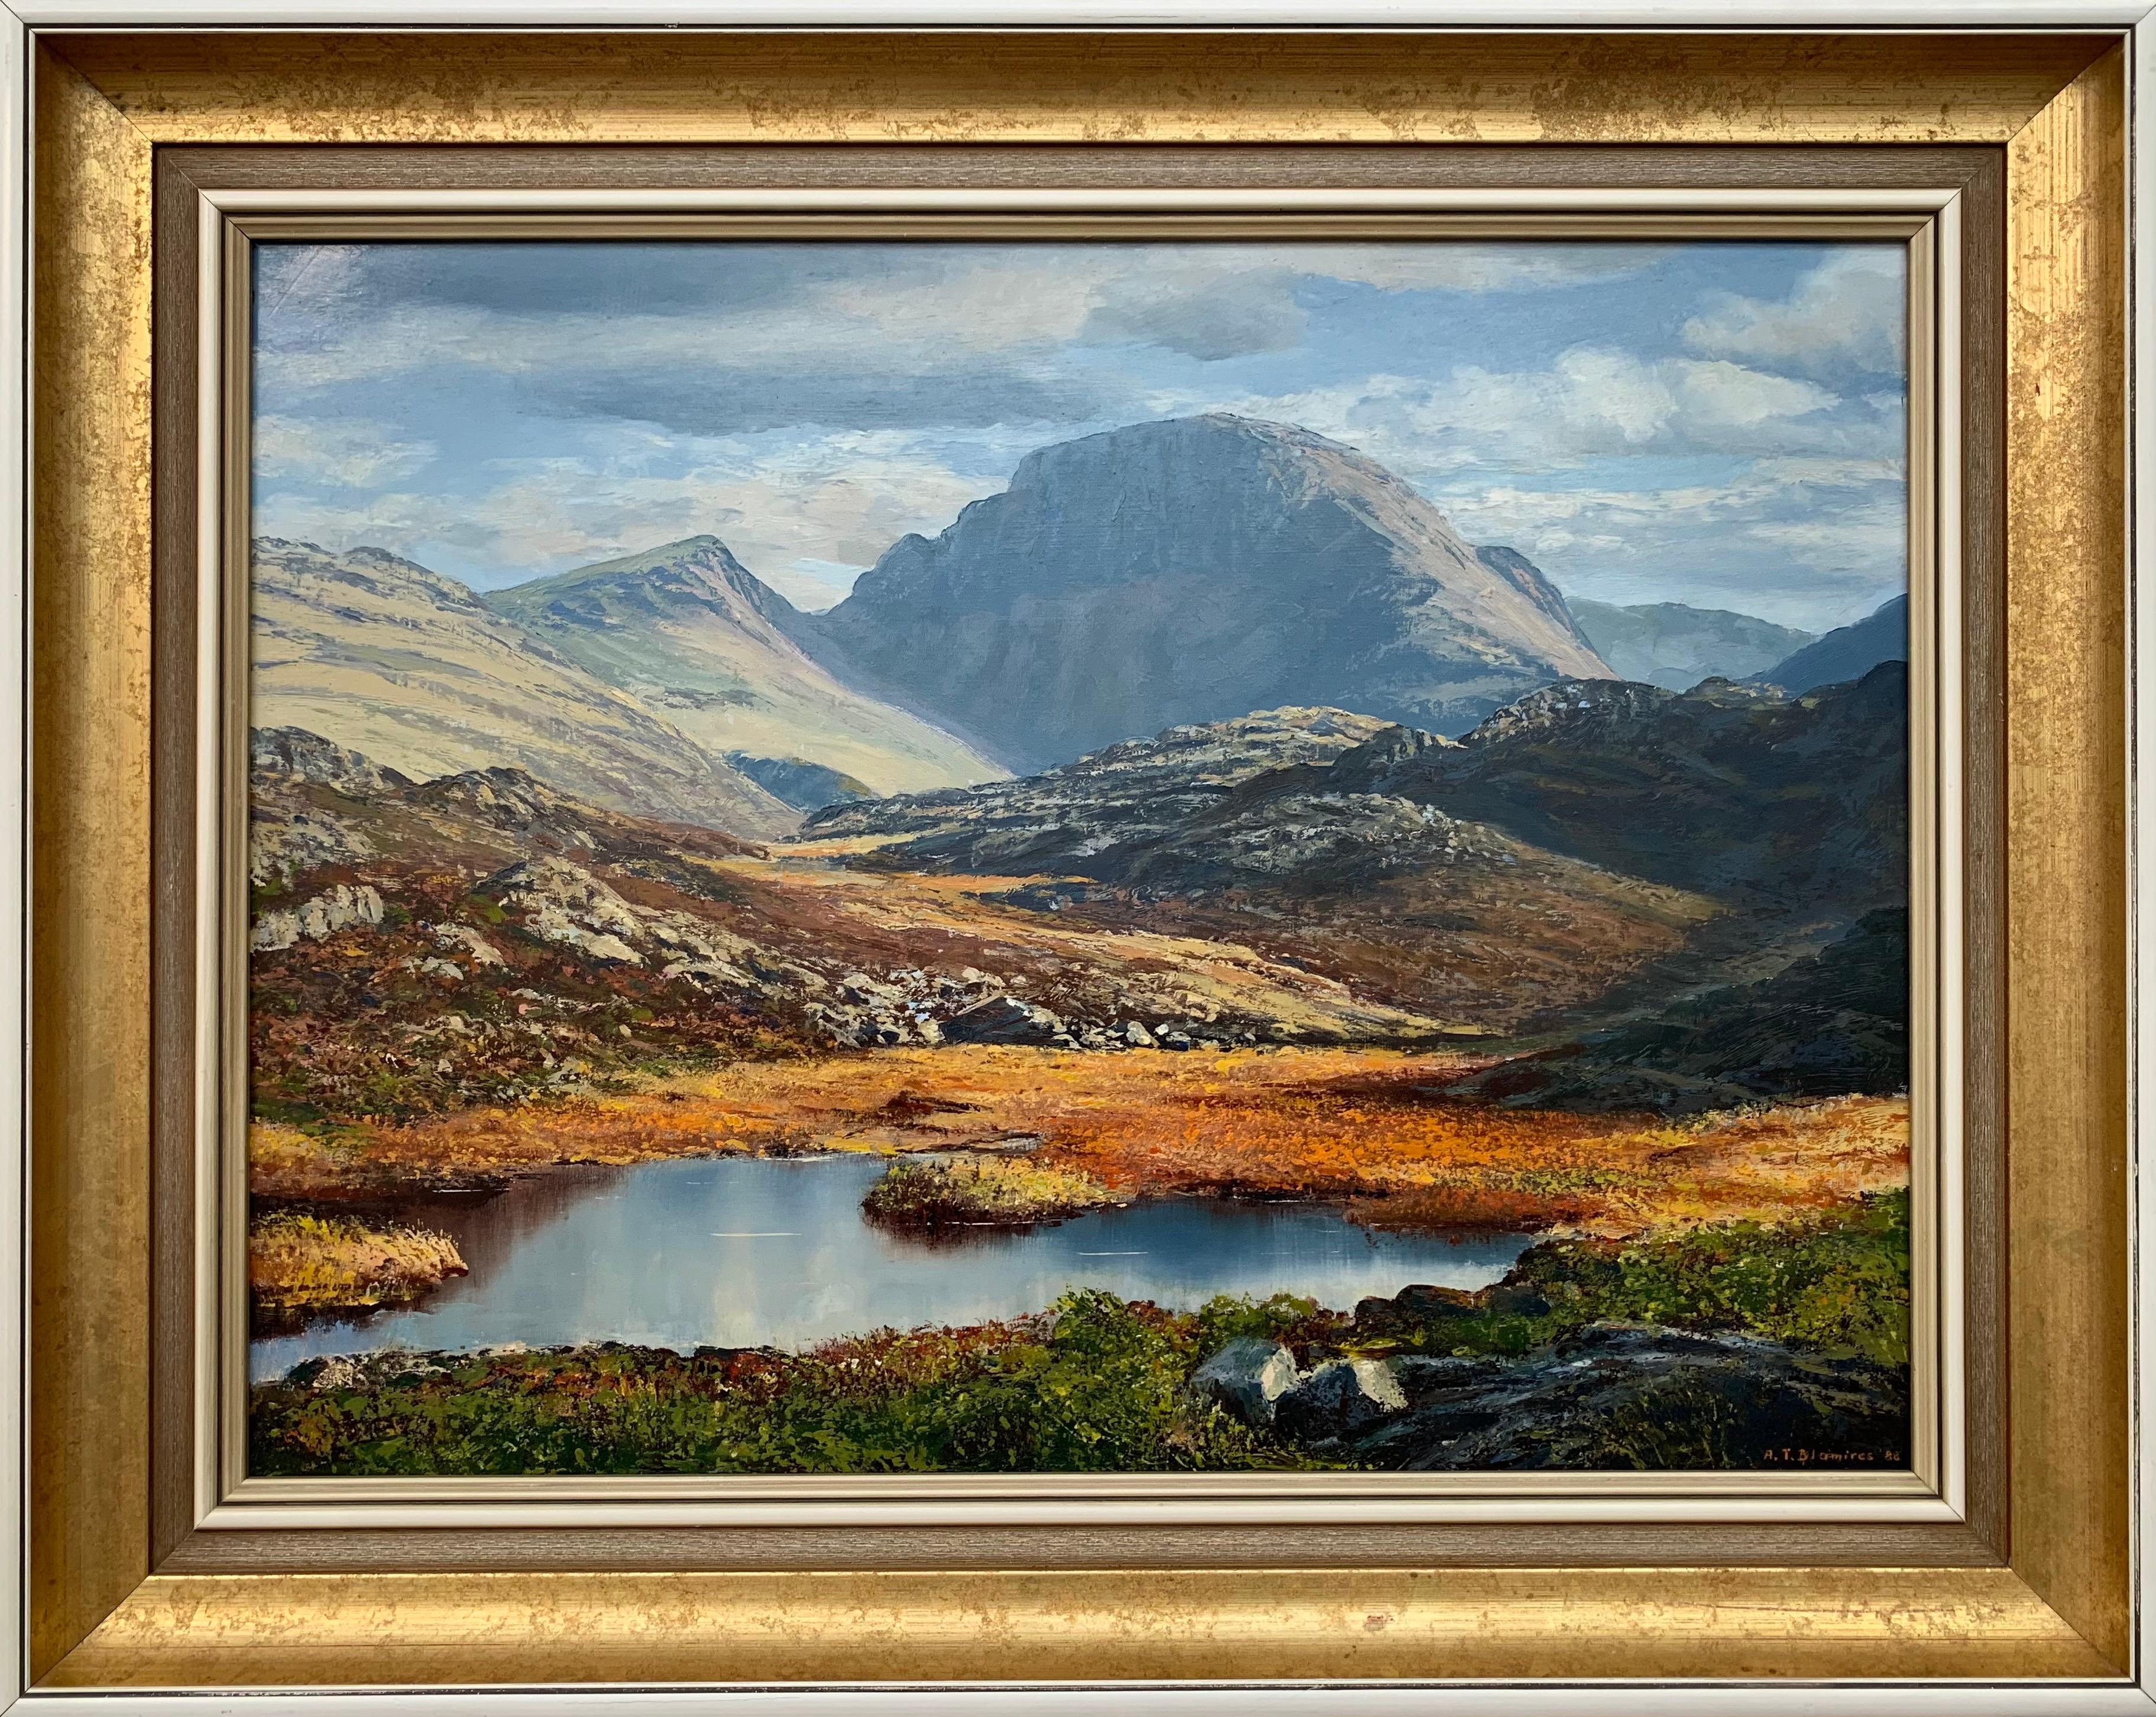 Arthur Terry Blamires Landscape Painting - Great Gable in the English Lake District by Modern British Landscape Artist